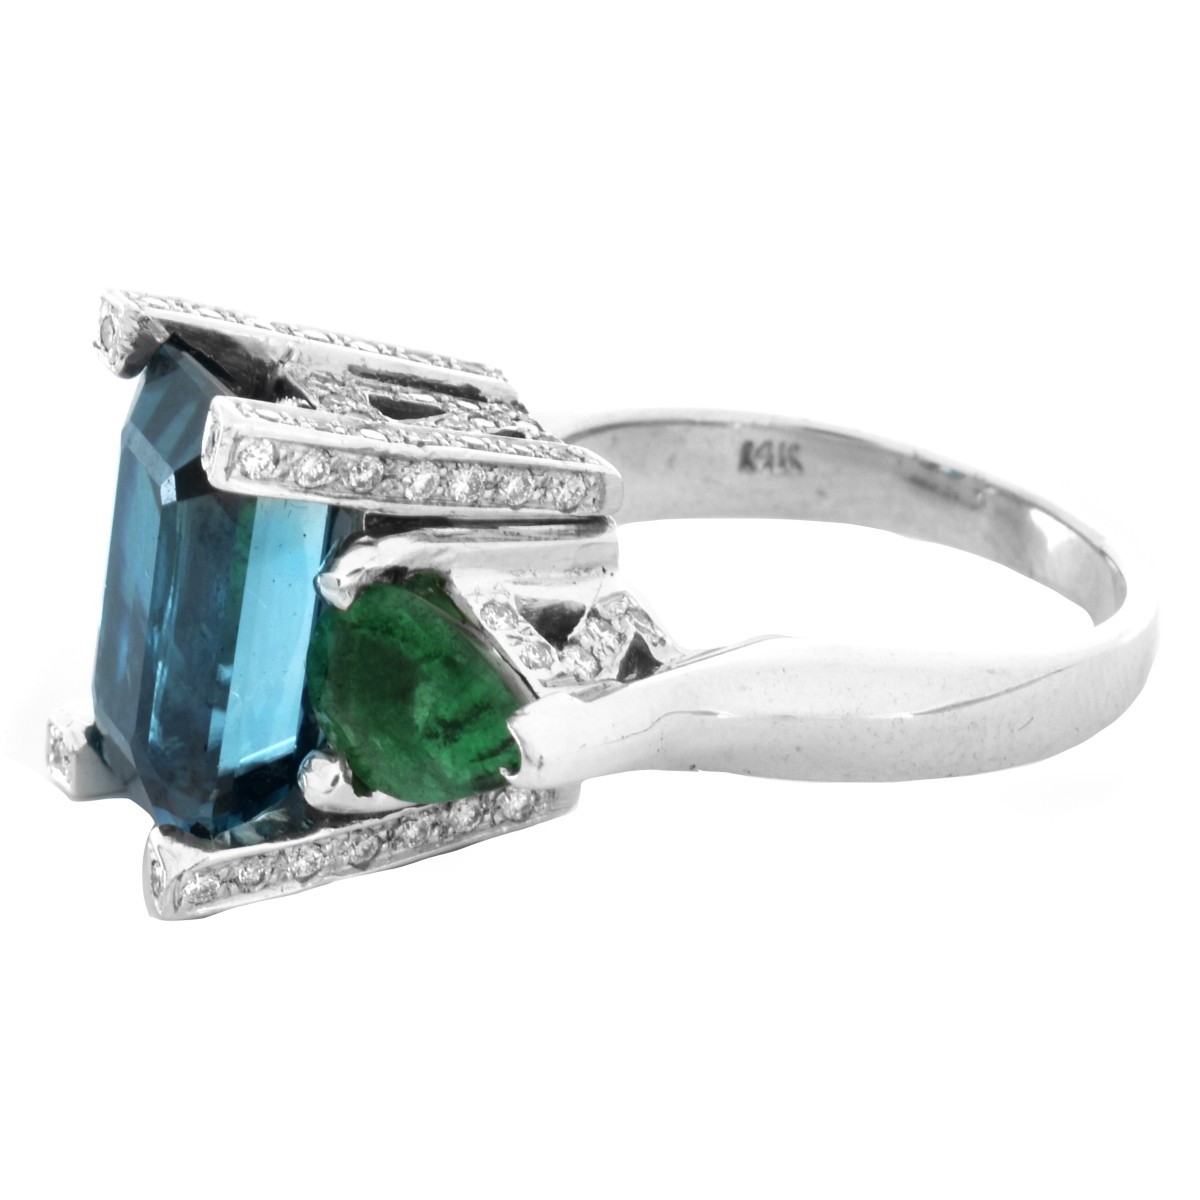 London Topaz, Emerald and 14K Ring